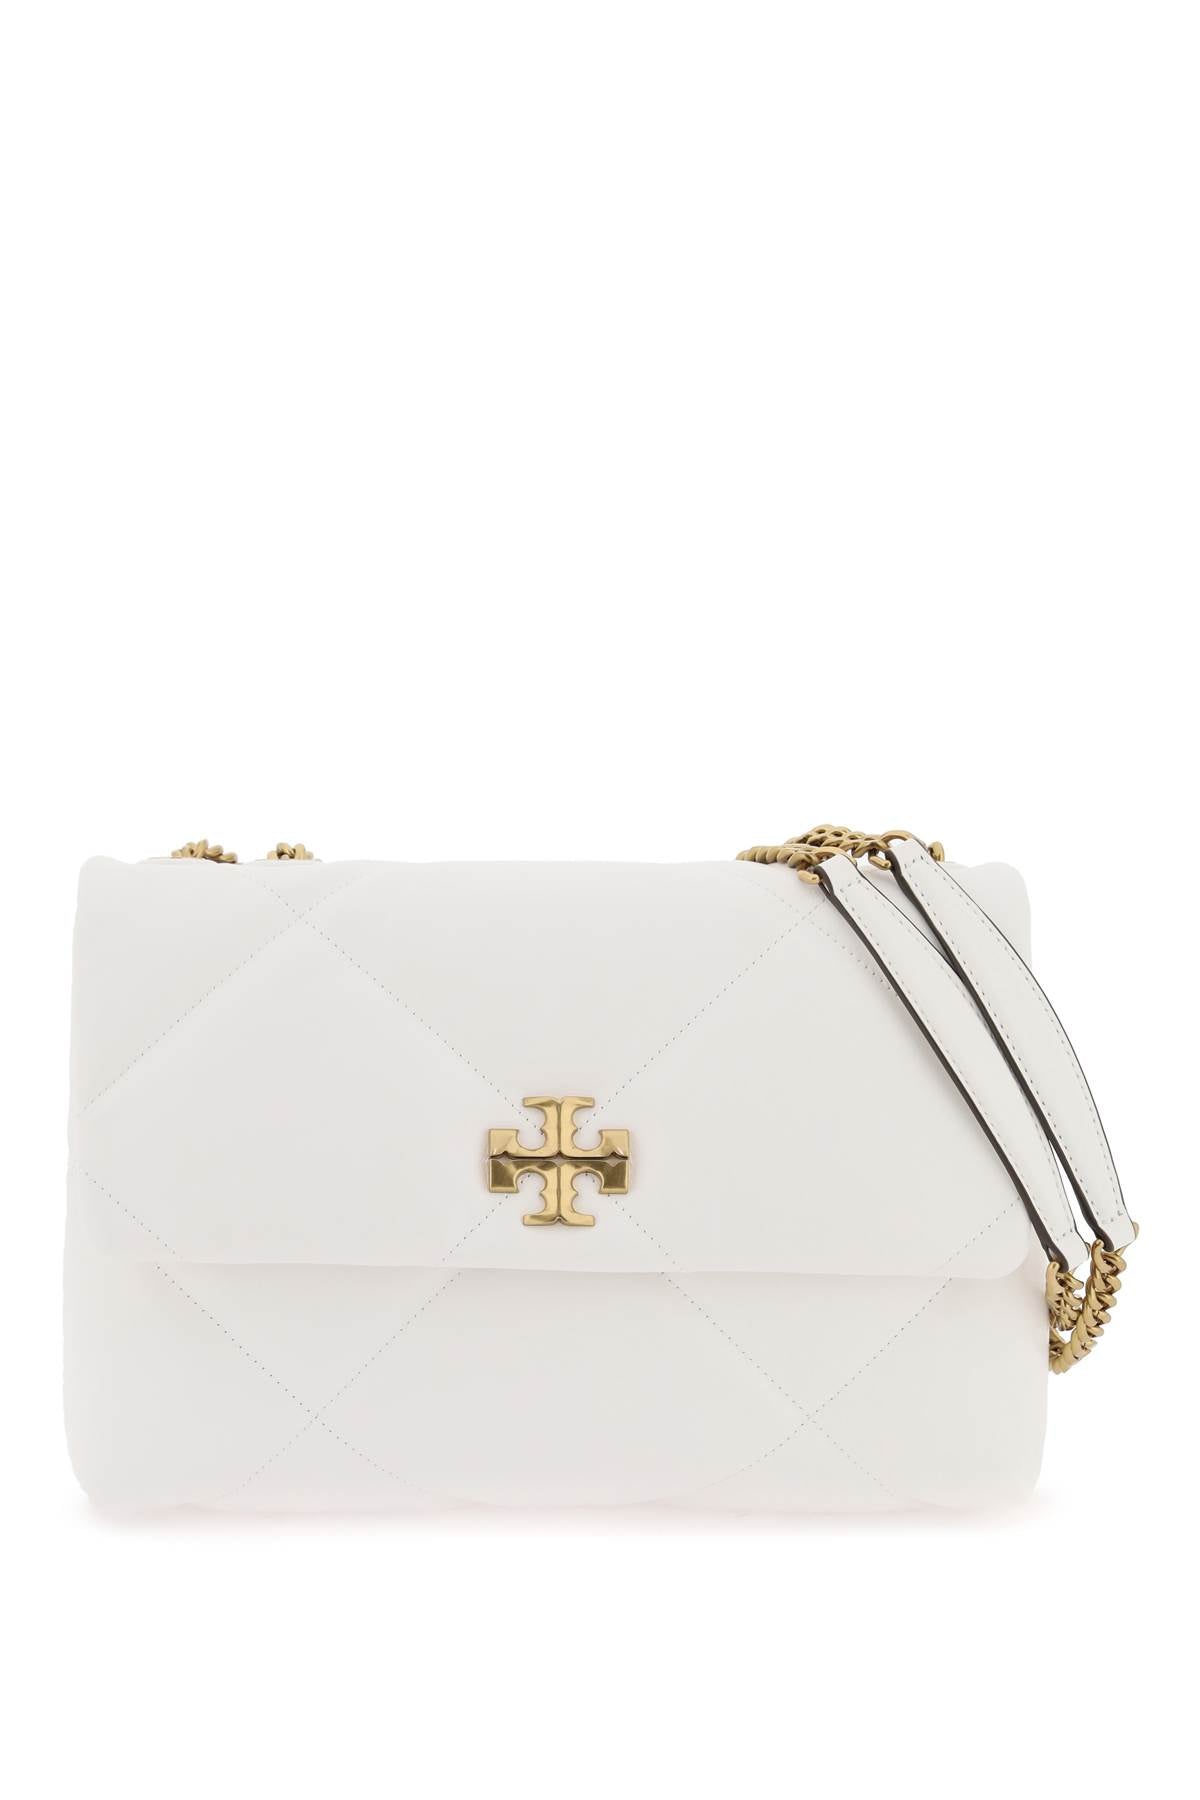 TORY BURCH Quilted Nappa Leather Shoulder Handbag for Women - White